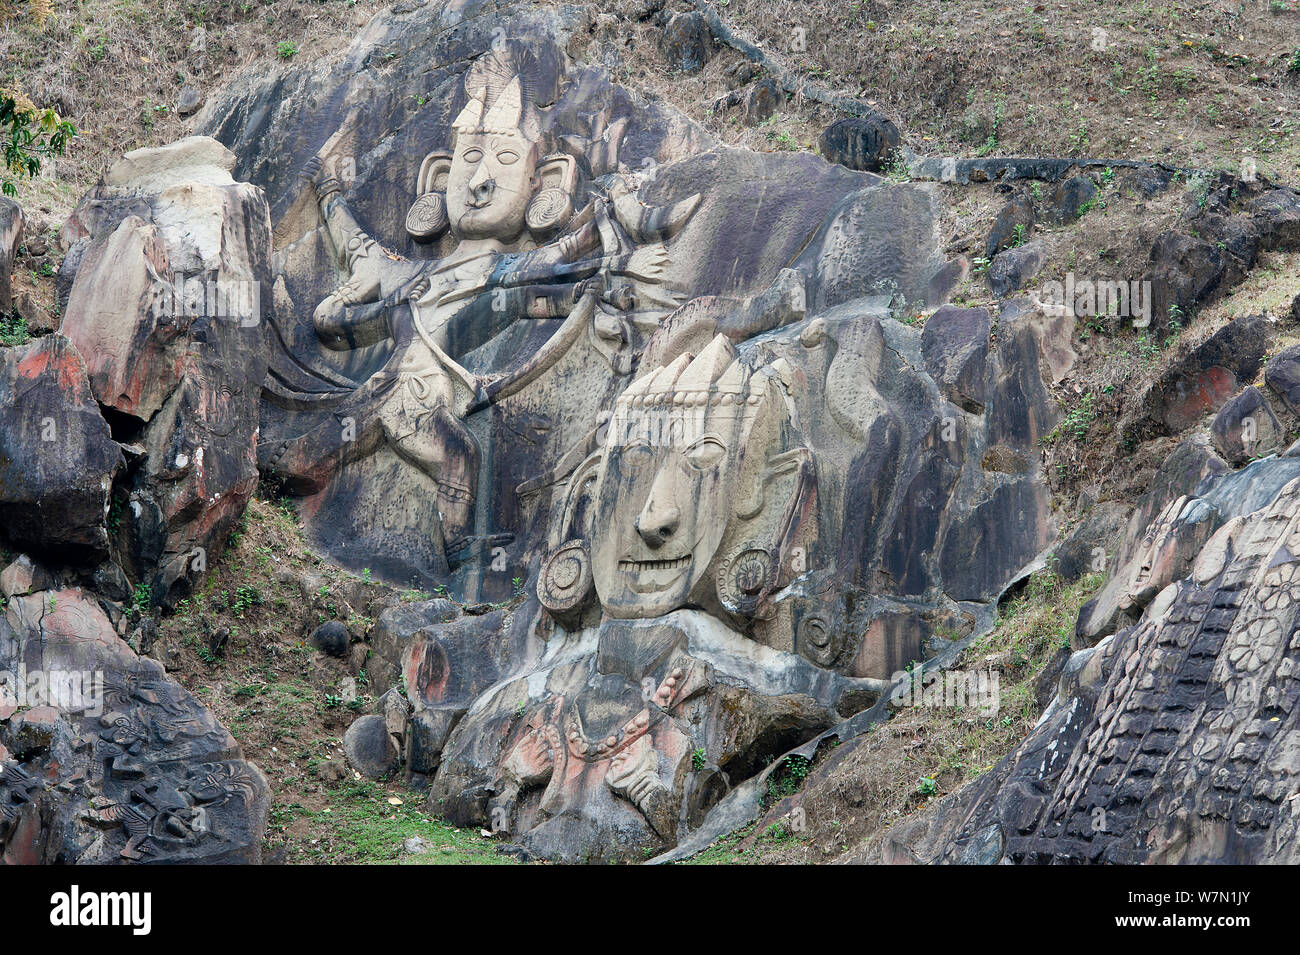 Archeological site (7th- 9th century) and Shiva pilgrimage site (Hinduism): rock carving depicting Laxman and Ram or Rama. Unakoti, Tripura, India, March 2012. Stock Photo